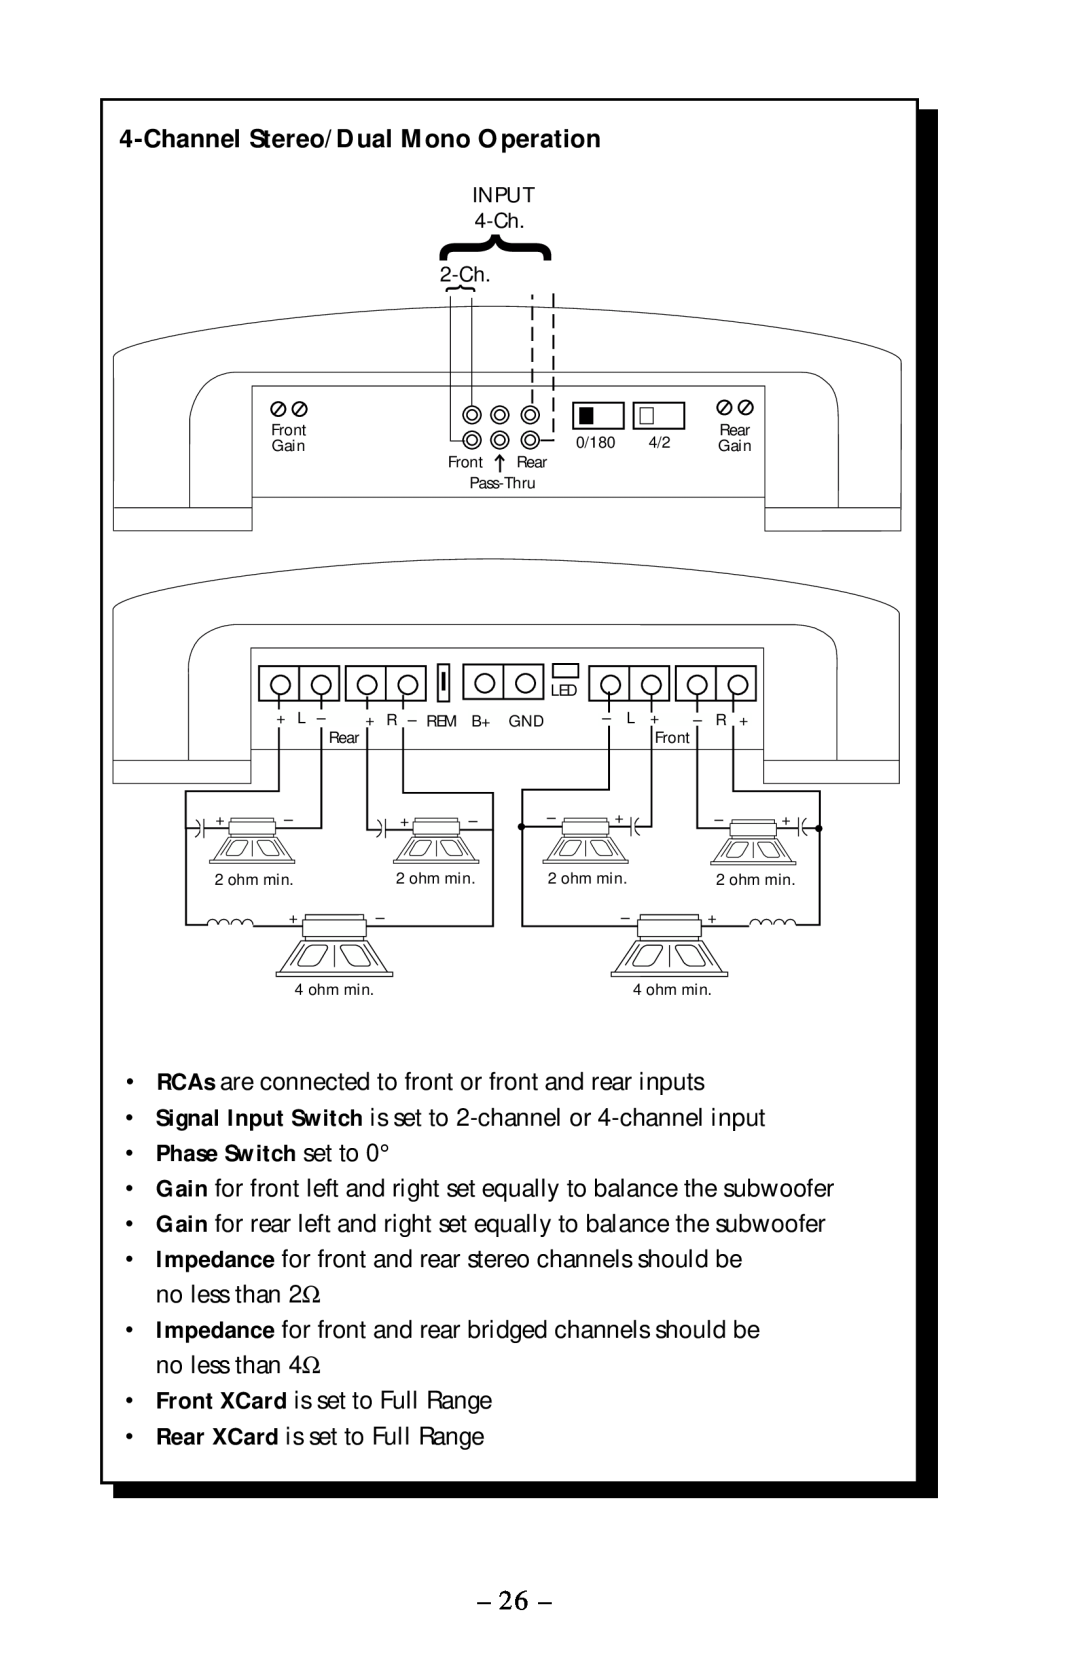 Rockford Fosgate 400x4 operation manual ChannelStereo/Dual Mono Operation, Phase Switch set to 